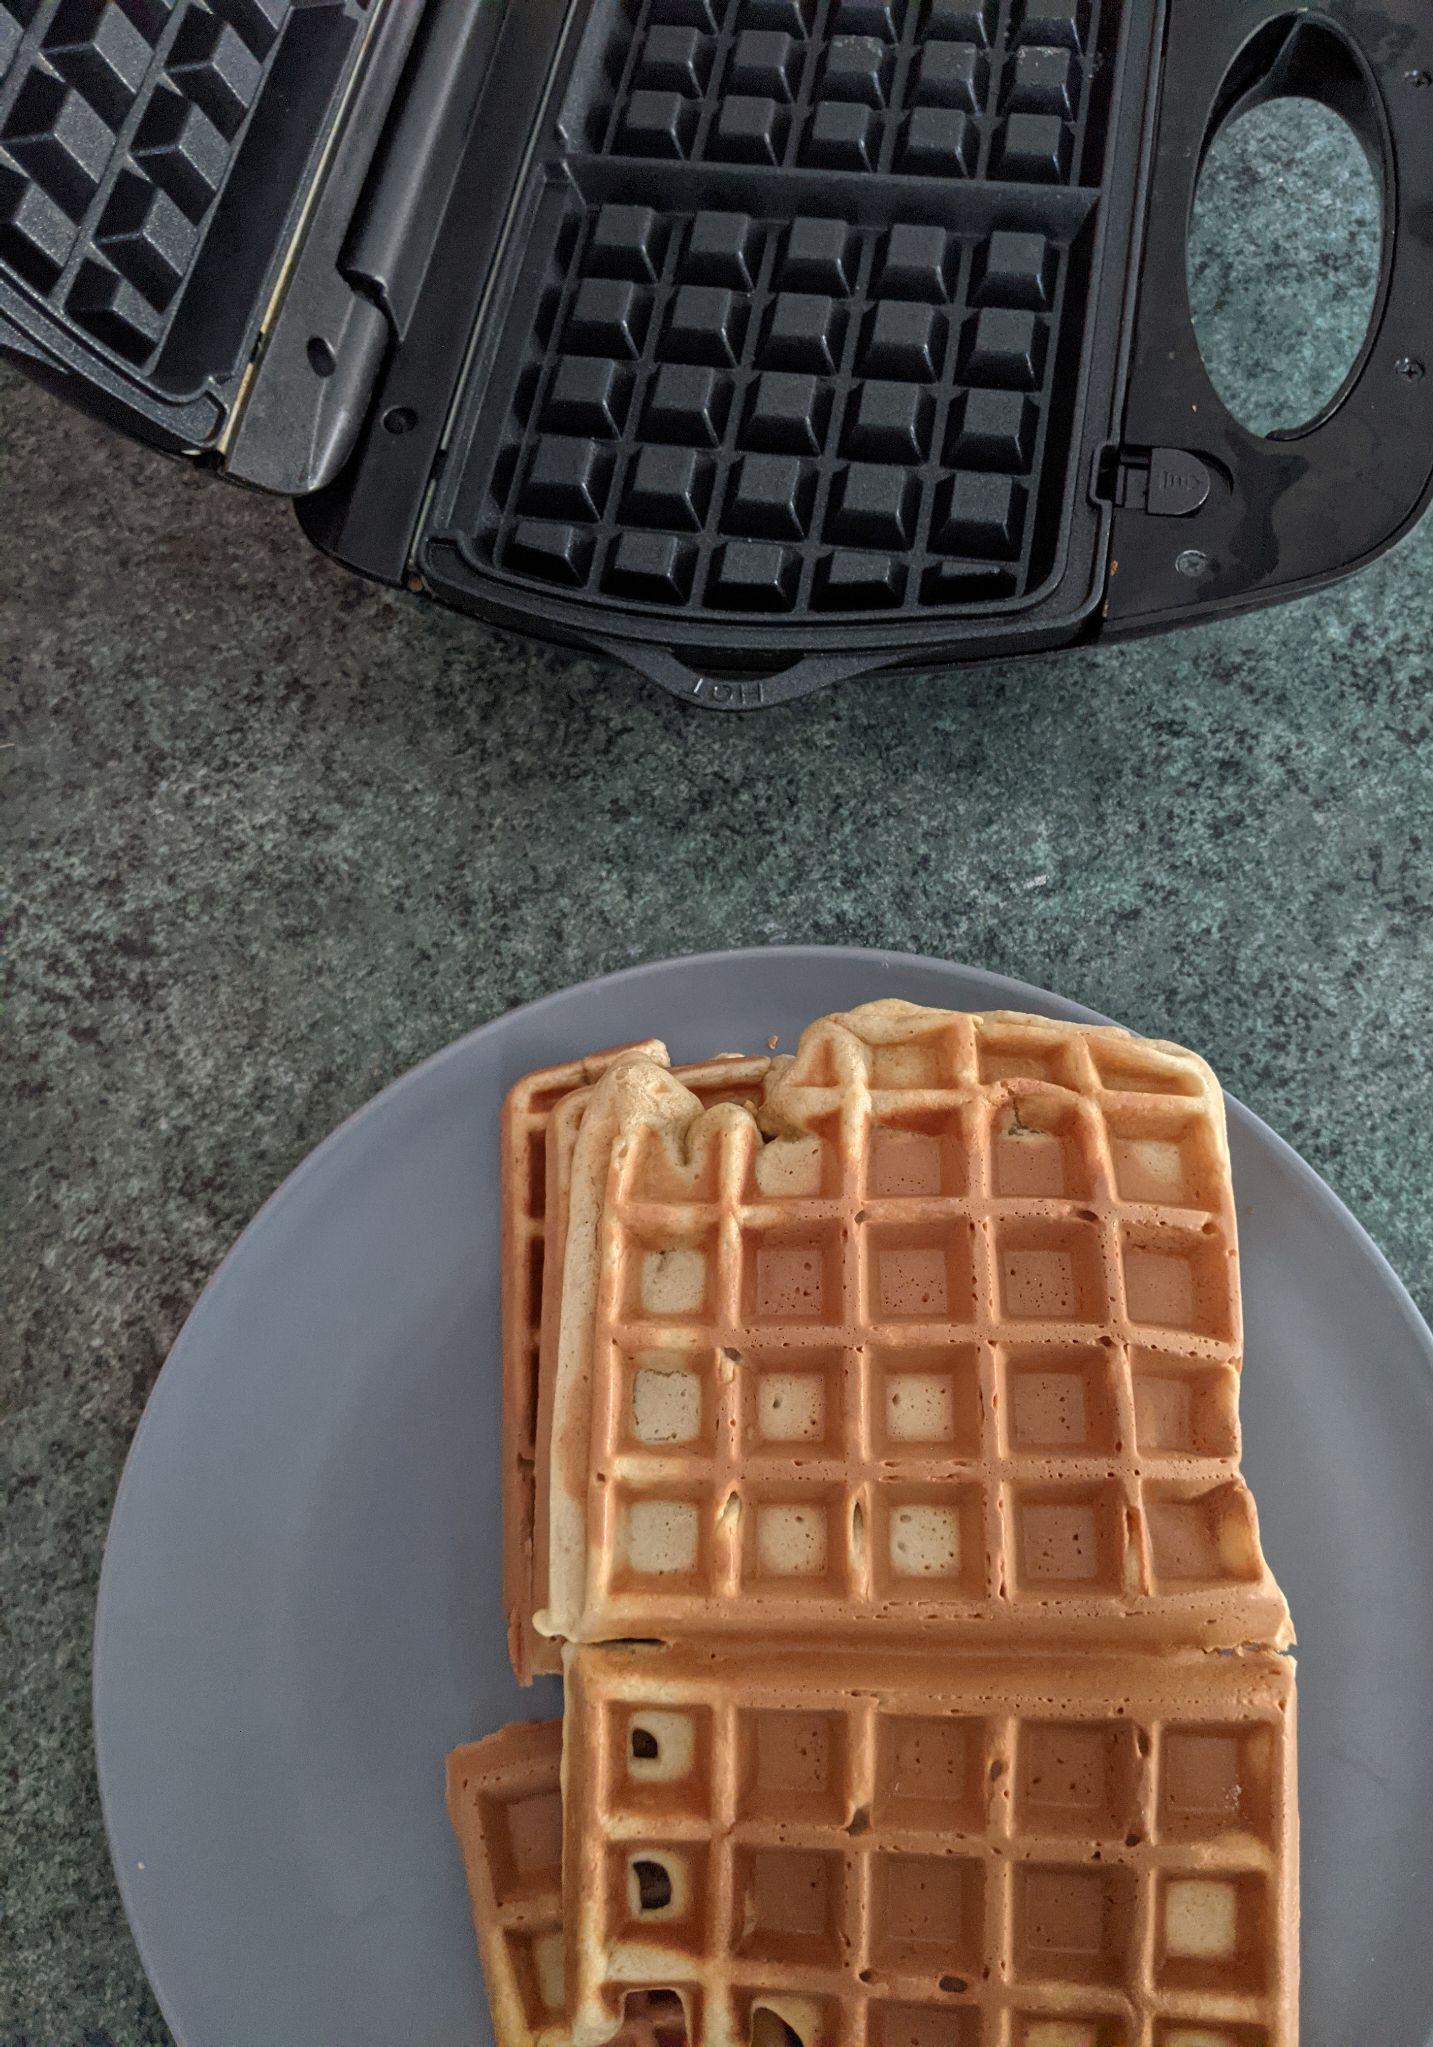 yes, my waffles are slightly overcooked